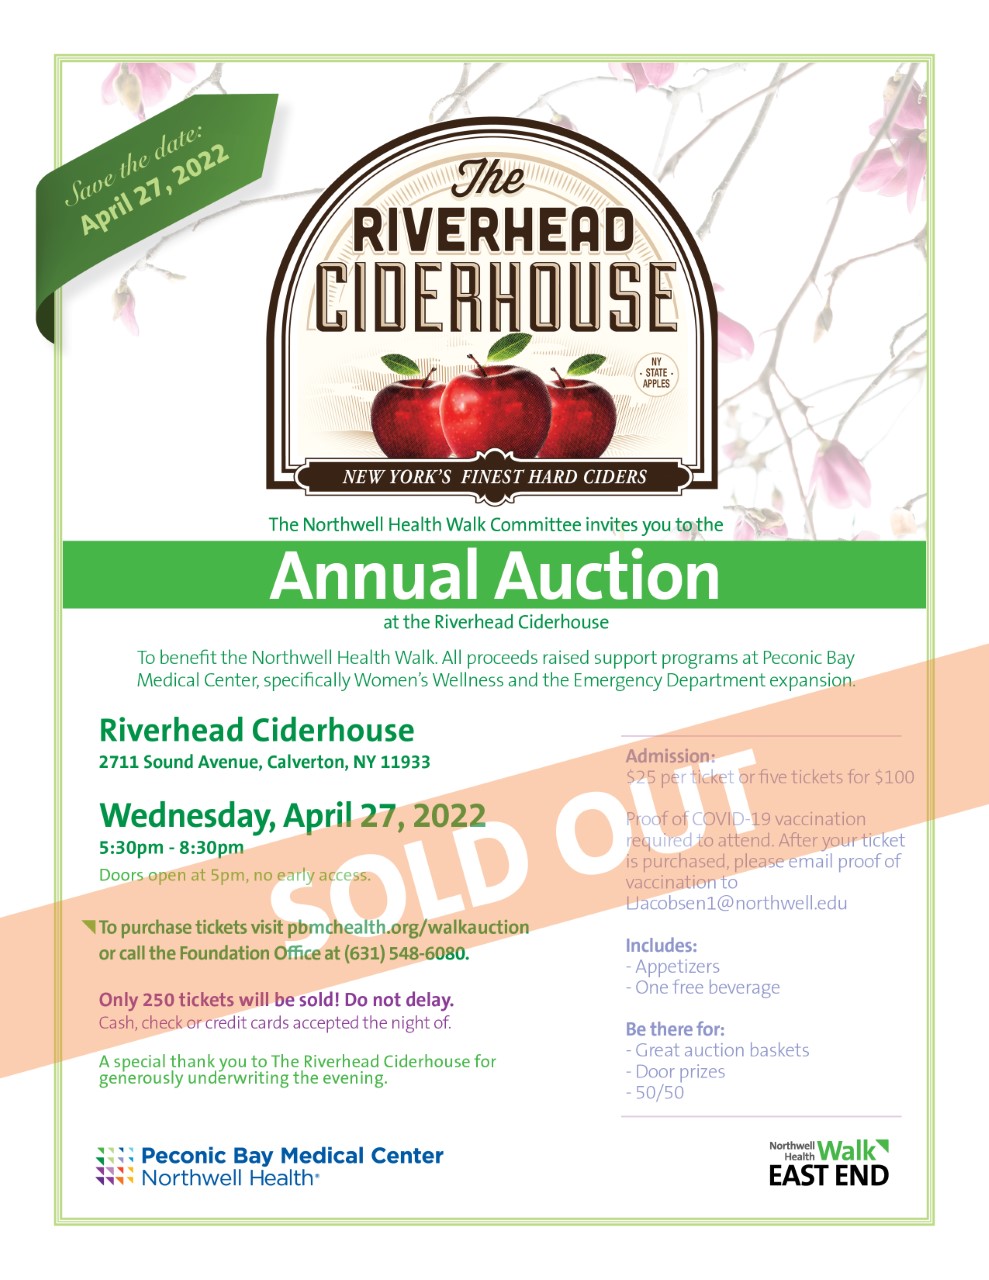 sold out ciderhouse